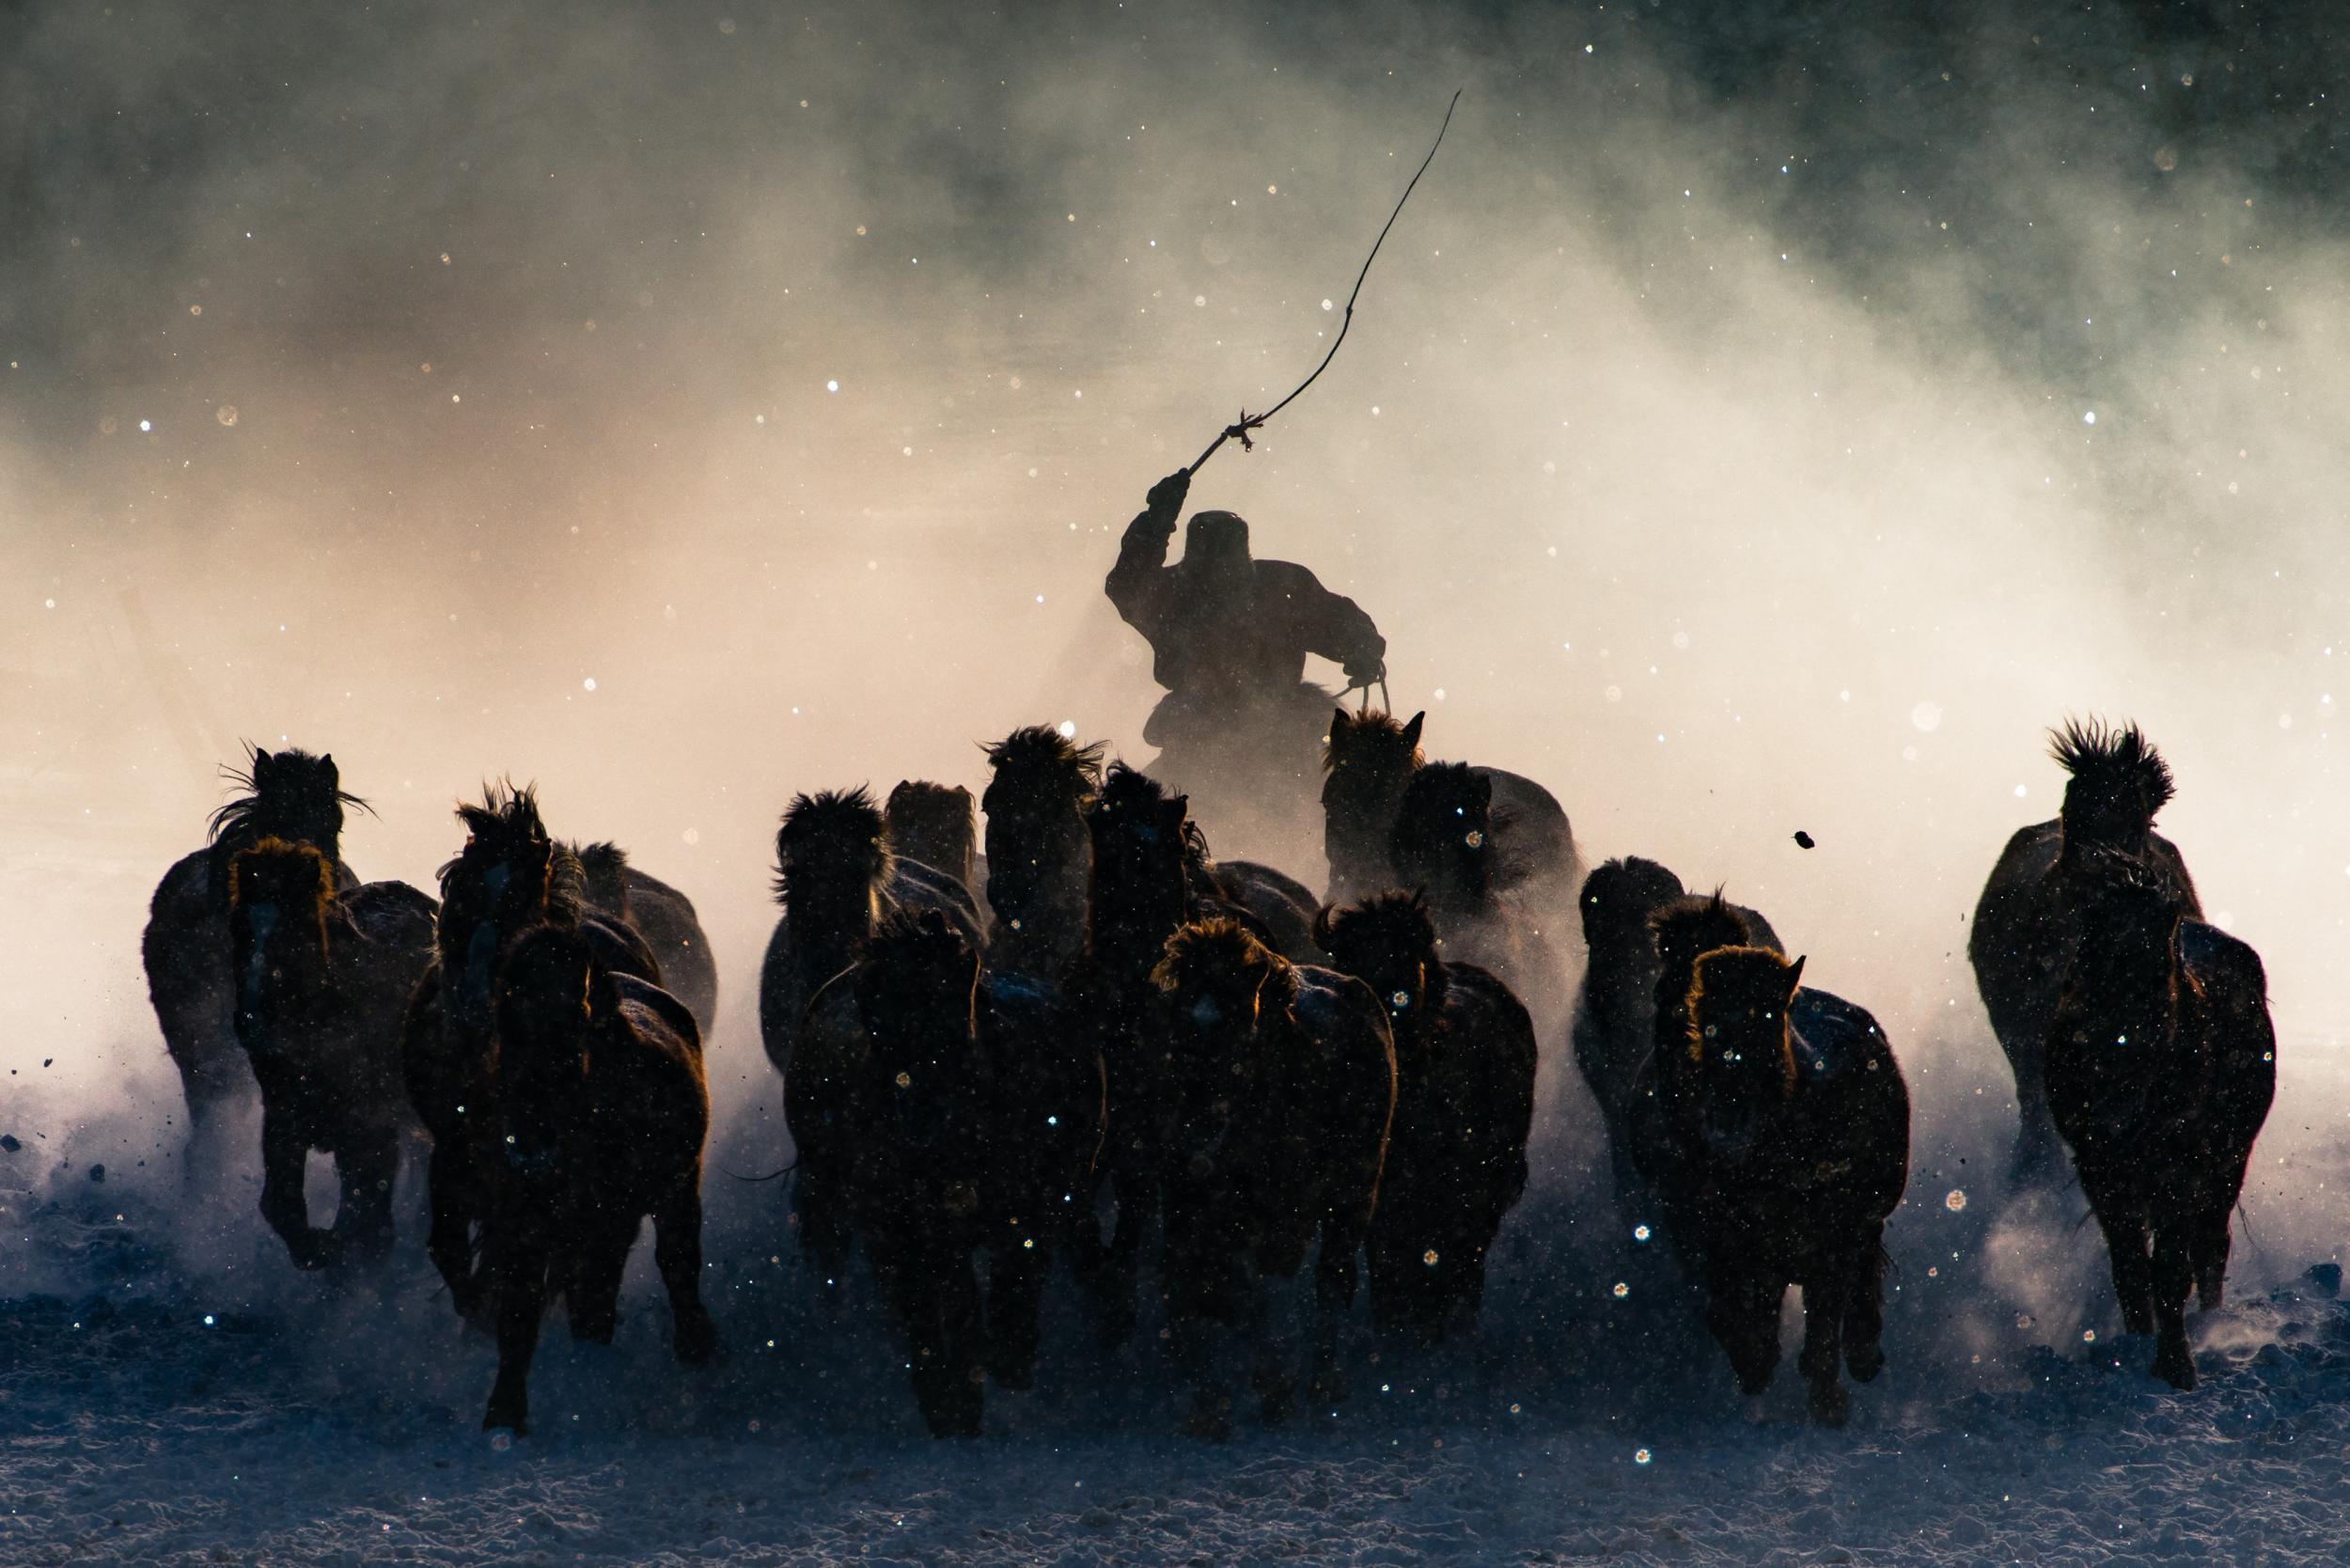 'Winter Horseman' by Travel Photographer of the Year winner Anthony Lau